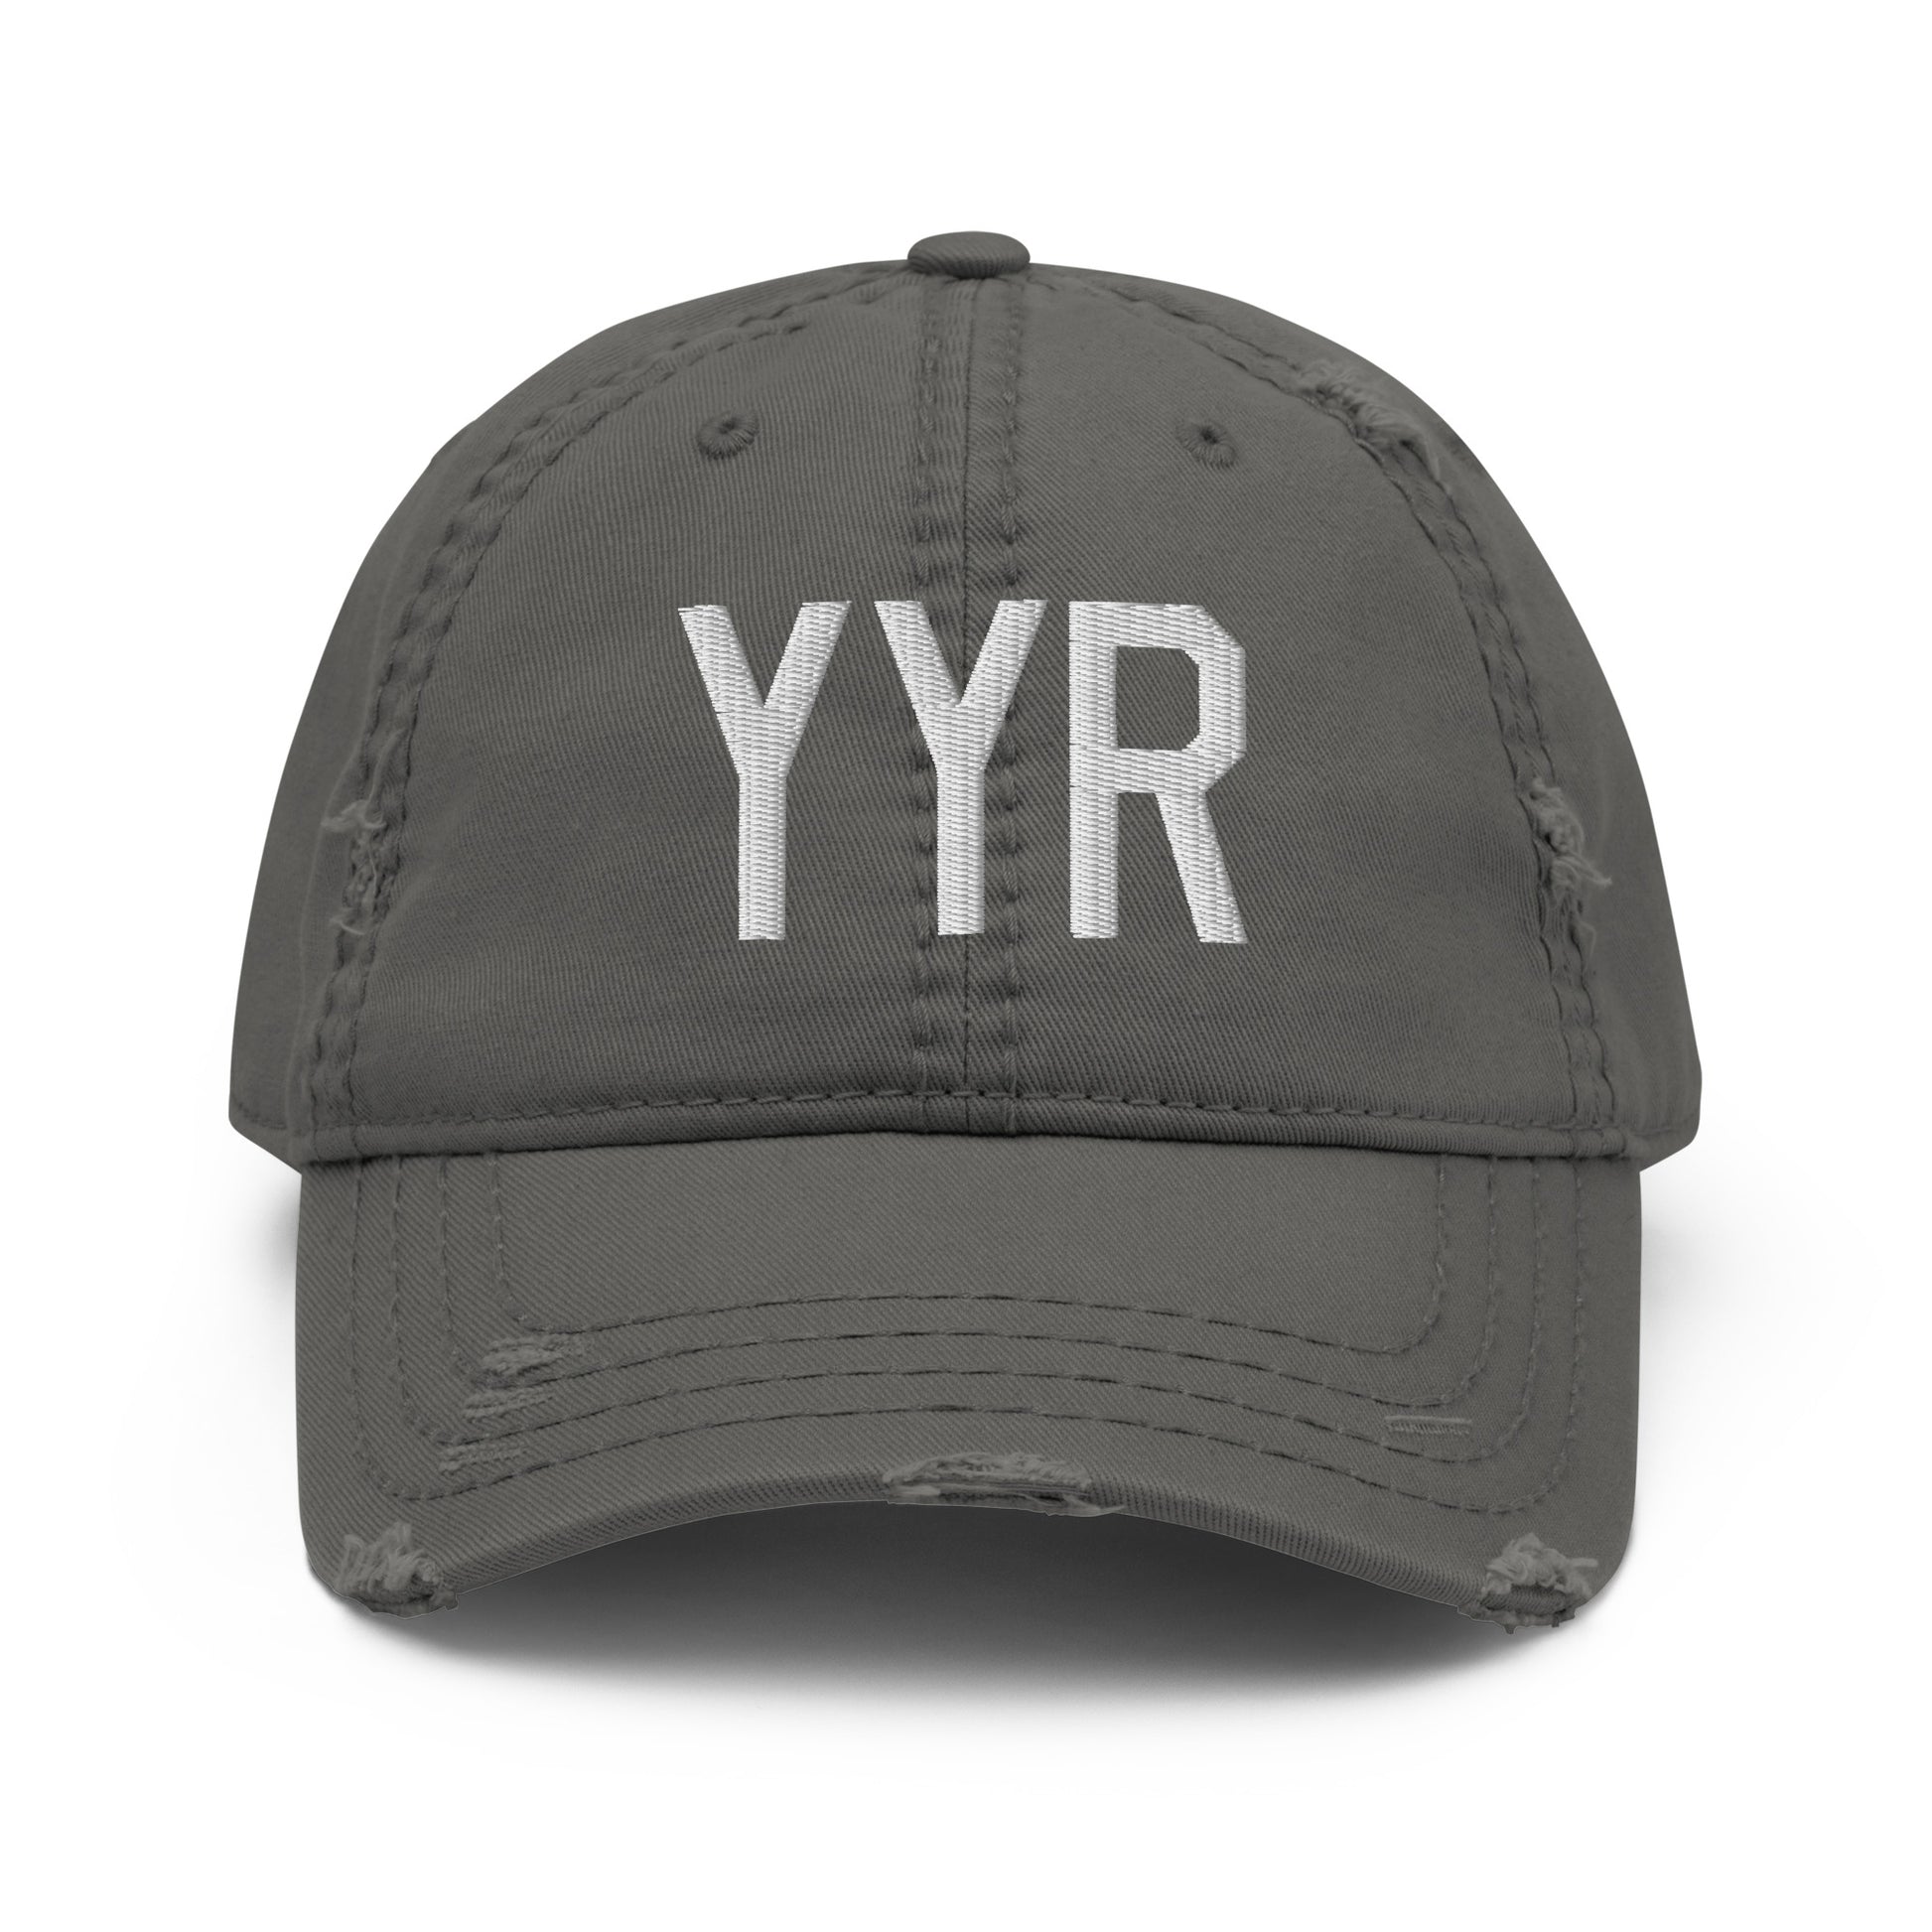 Airport Code Distressed Hat - White • YYR Goose Bay • YHM Designs - Image 15